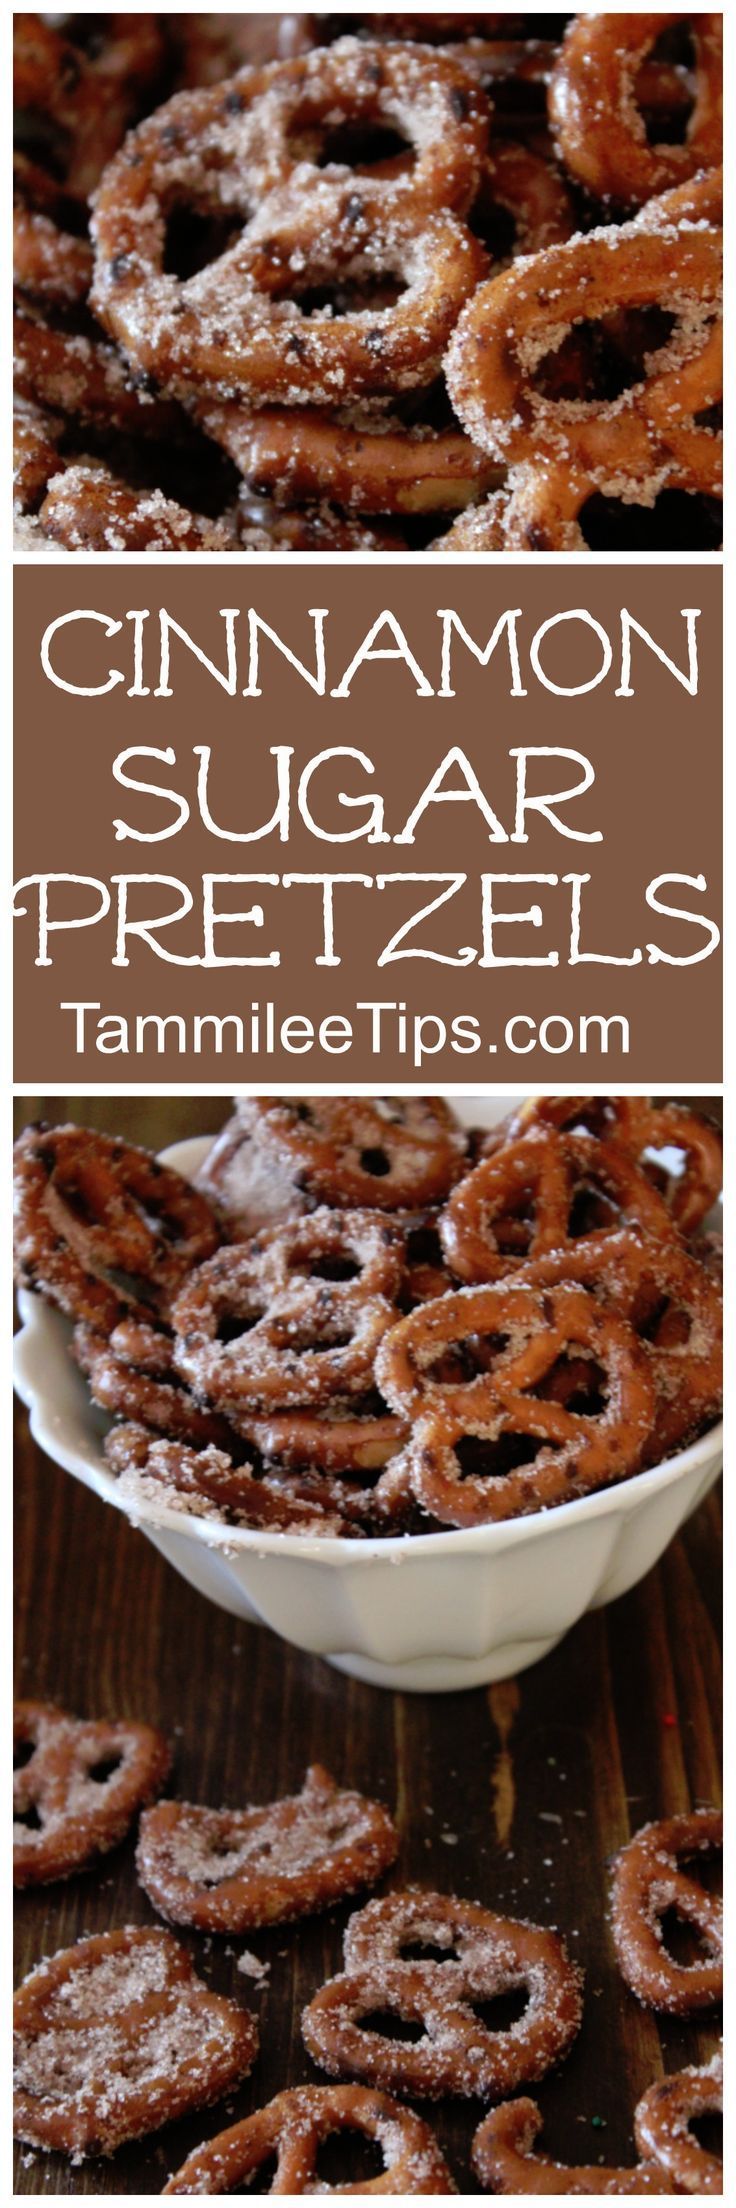 Super easy Cinnamon Sugar Pretzels! Perfect for DIY Homemade holiday gifts! This s